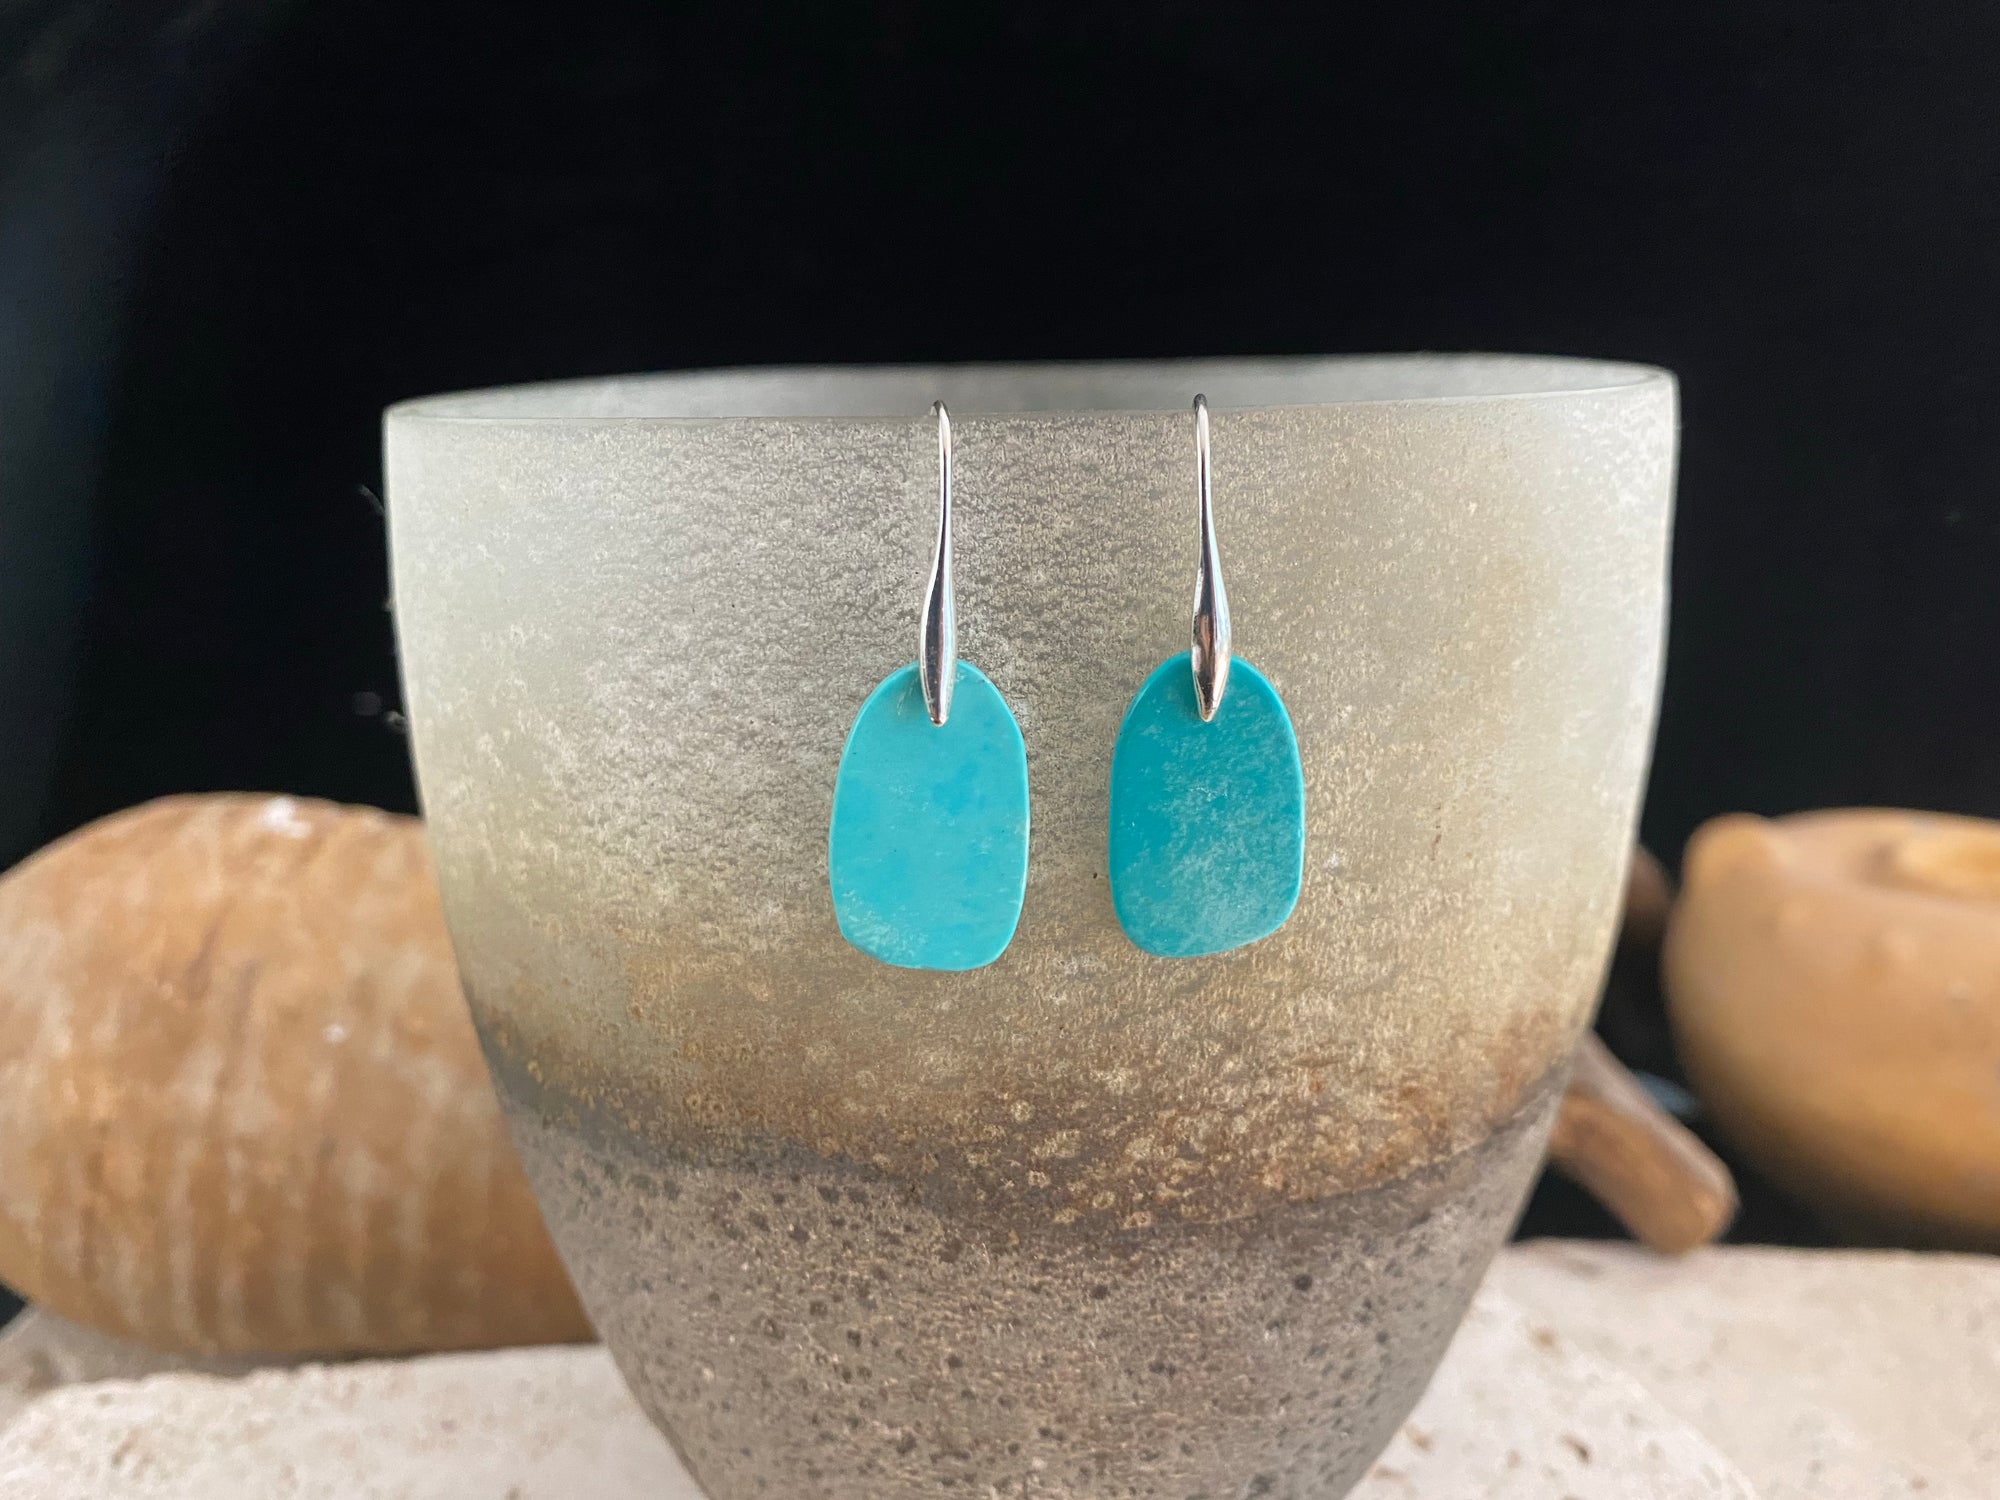 Turquoise dyed howlite and sterling silver earrings, length 3.6-3.9 cm including hook